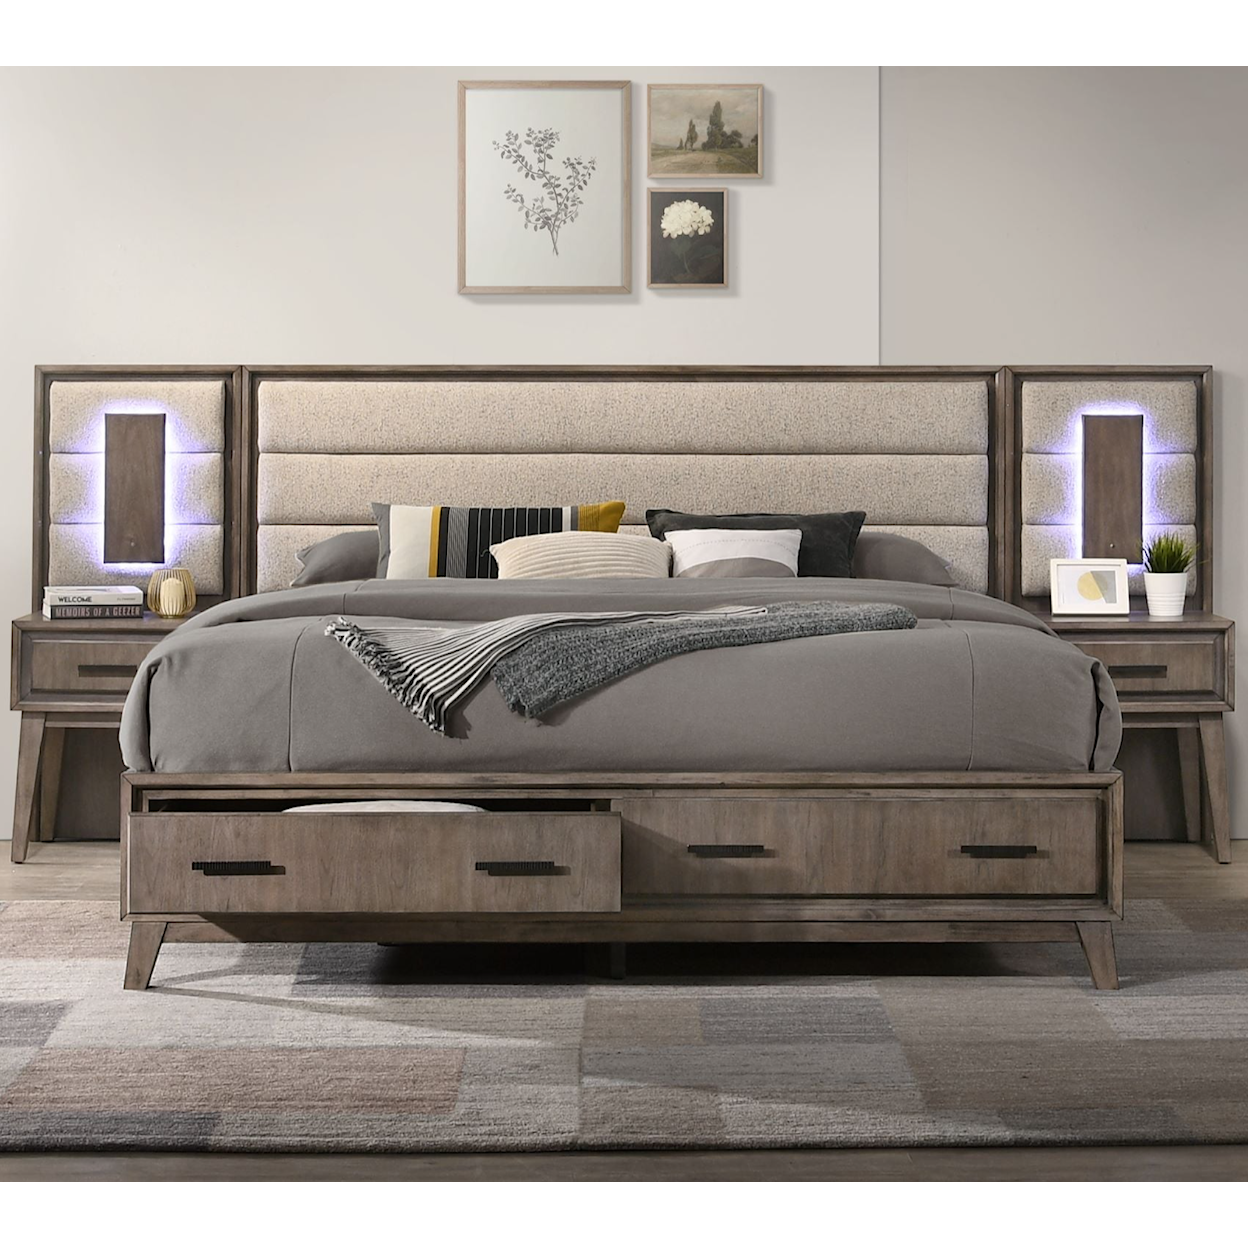 Alex's Furniture 8422A King Wall Bed